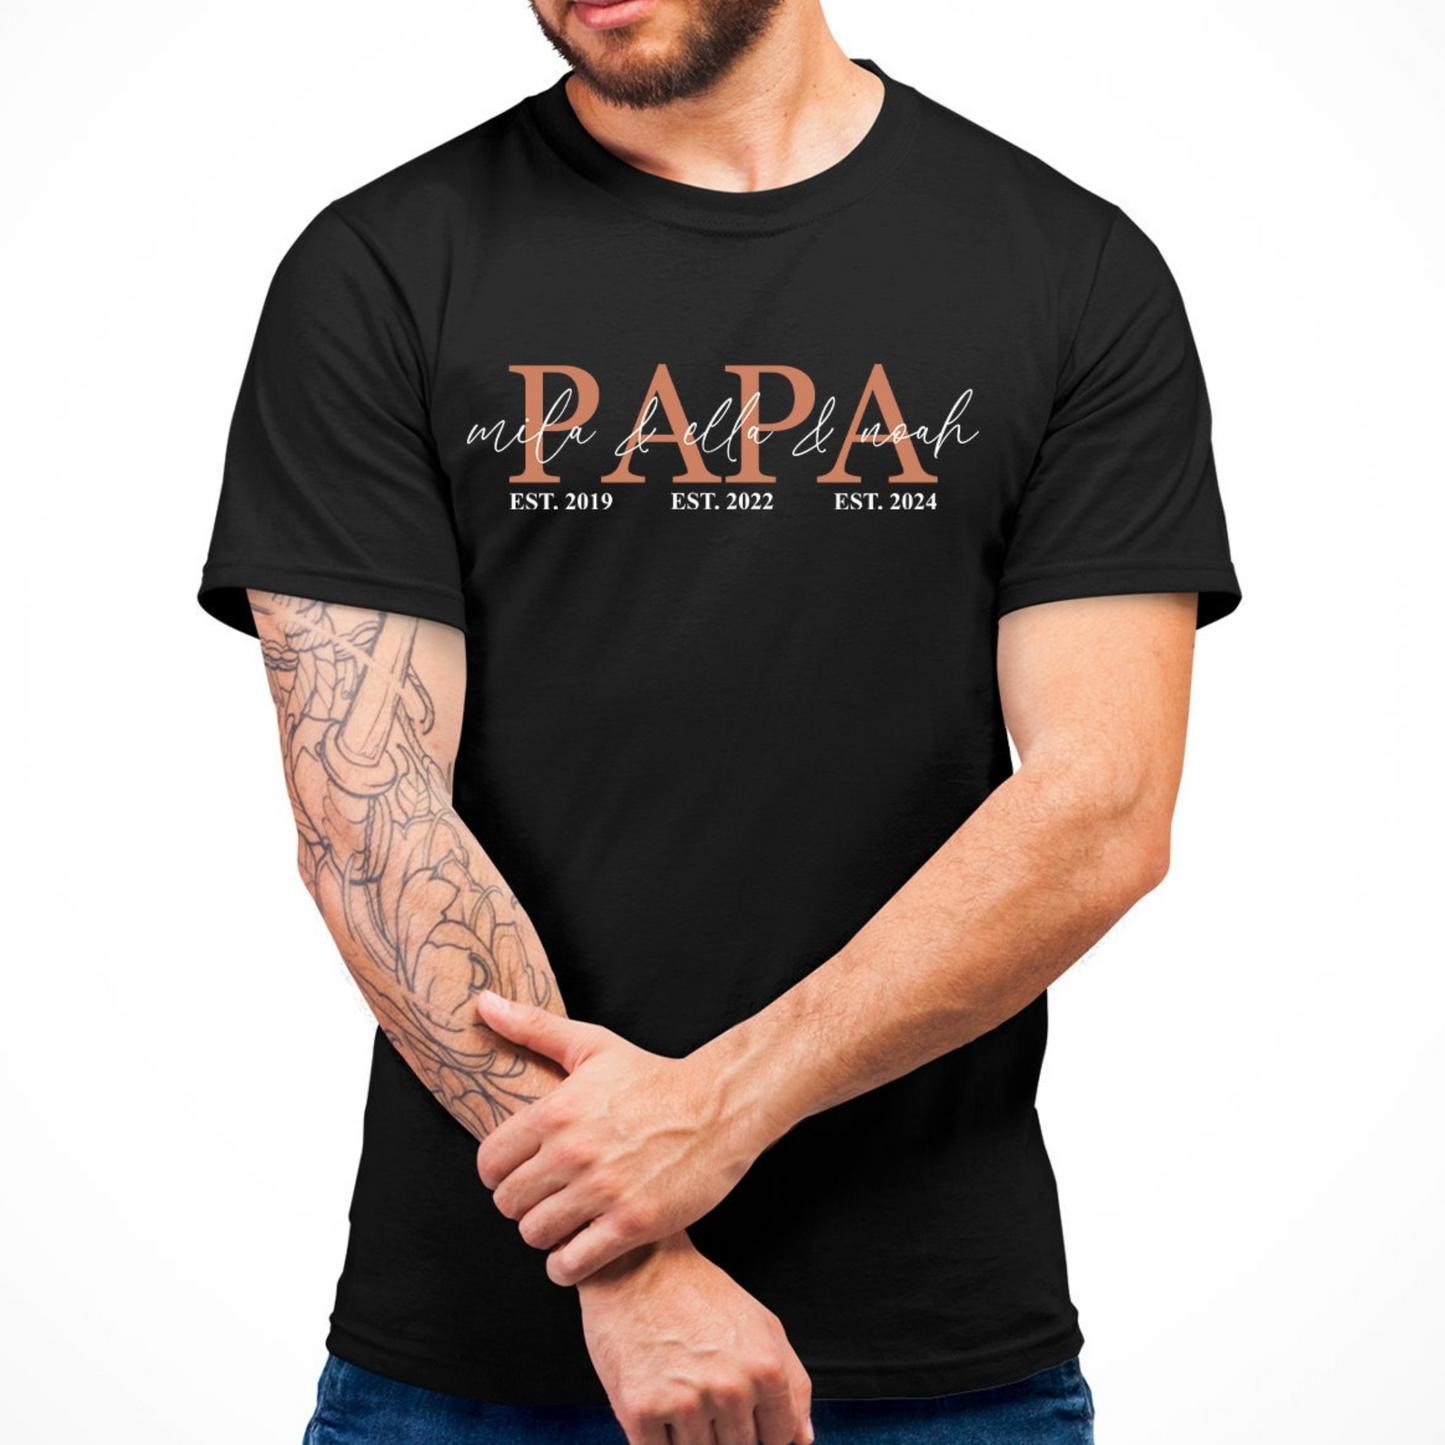 Custom Dad Shirt – Personalized with Kids’ Names and Birth Years